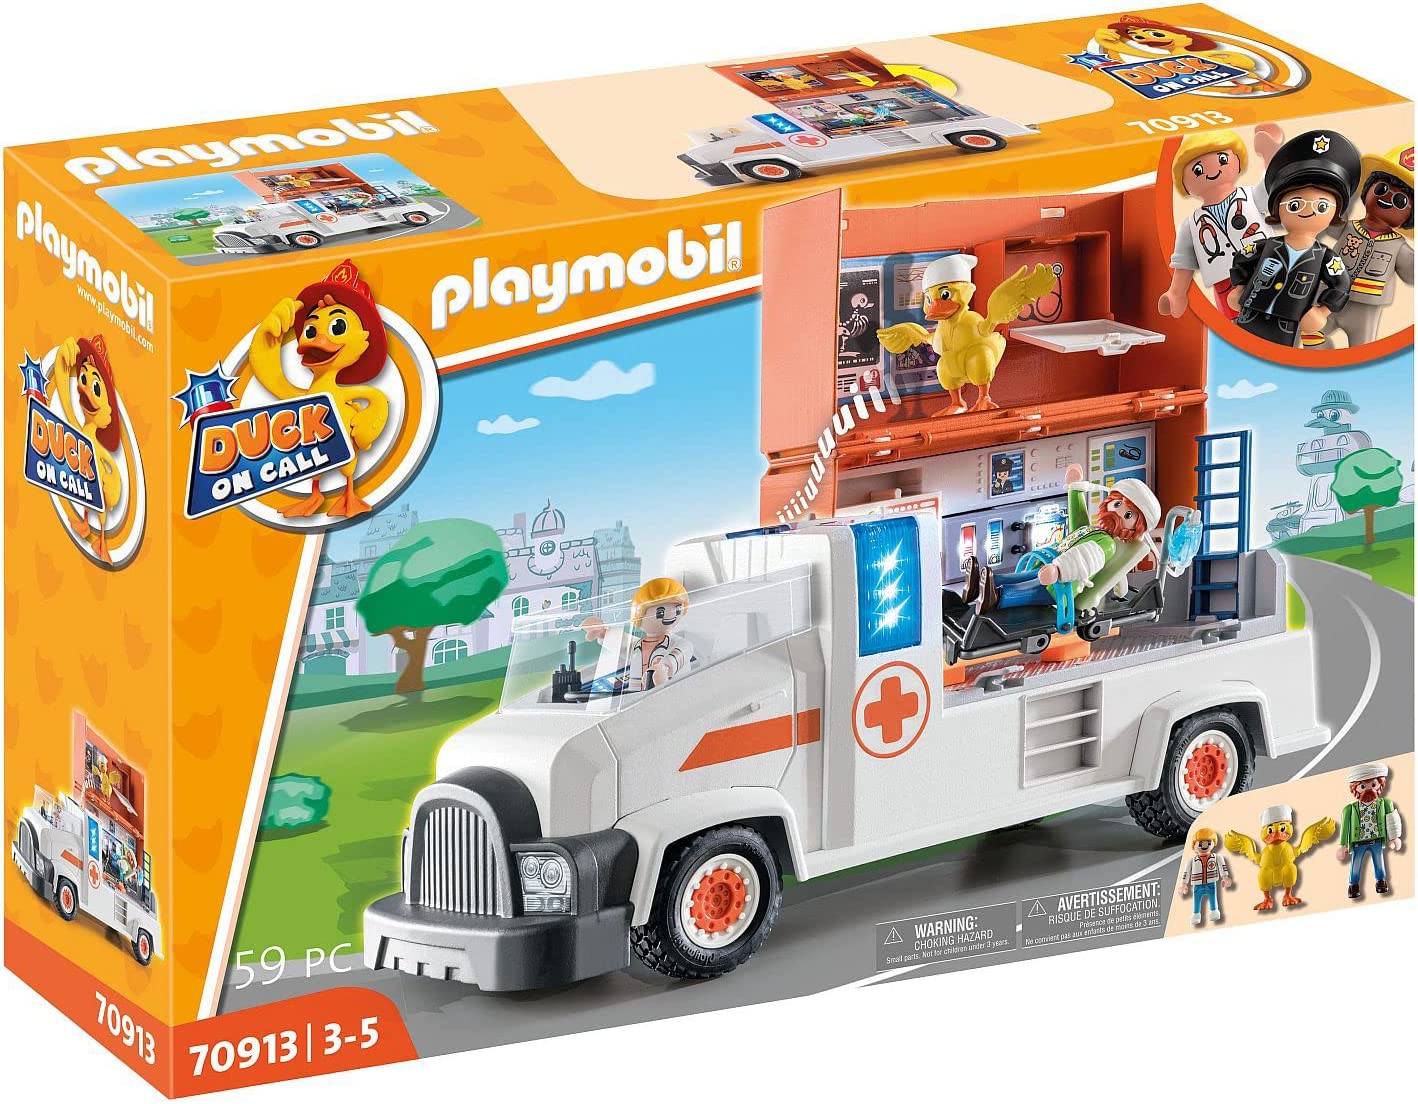 PLAYMOBIL Duck On Call 70913 Emergency Doctor Truck with Station, Light and Sound, Toy for Children from 3 Years